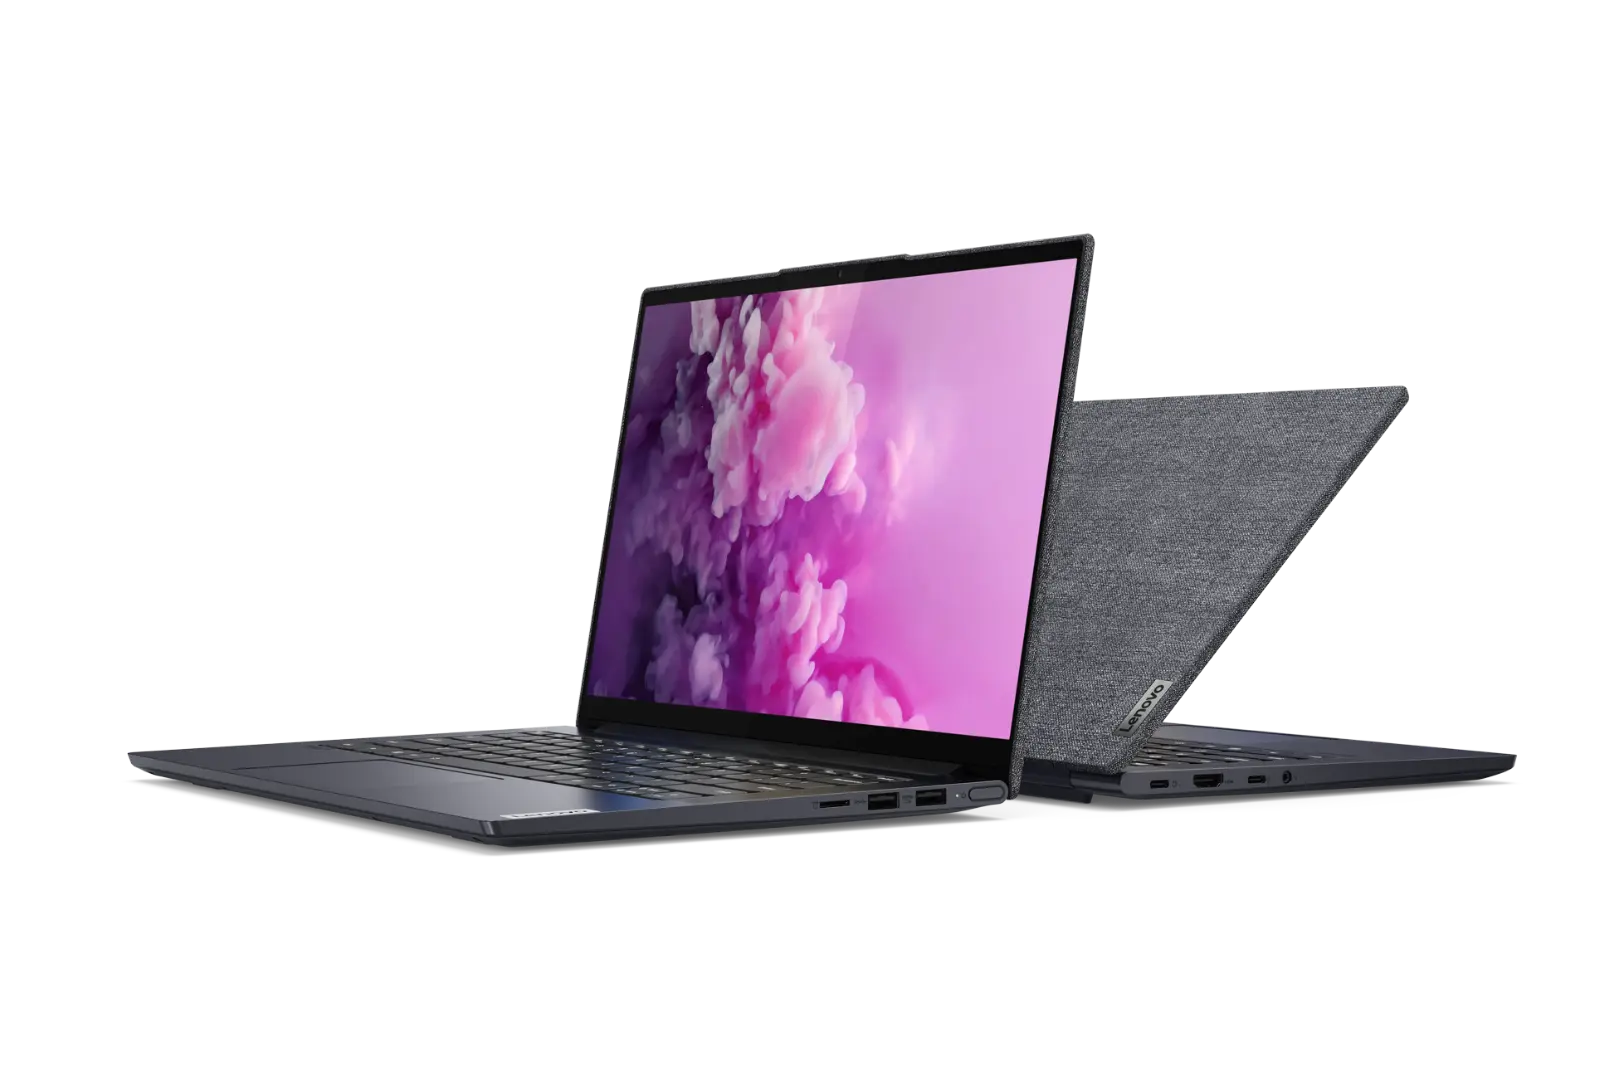 2 Lenovo Yoga Slim laptops with fabric finish sitting back to back. One with colorful pink and purple smoke image on its screen